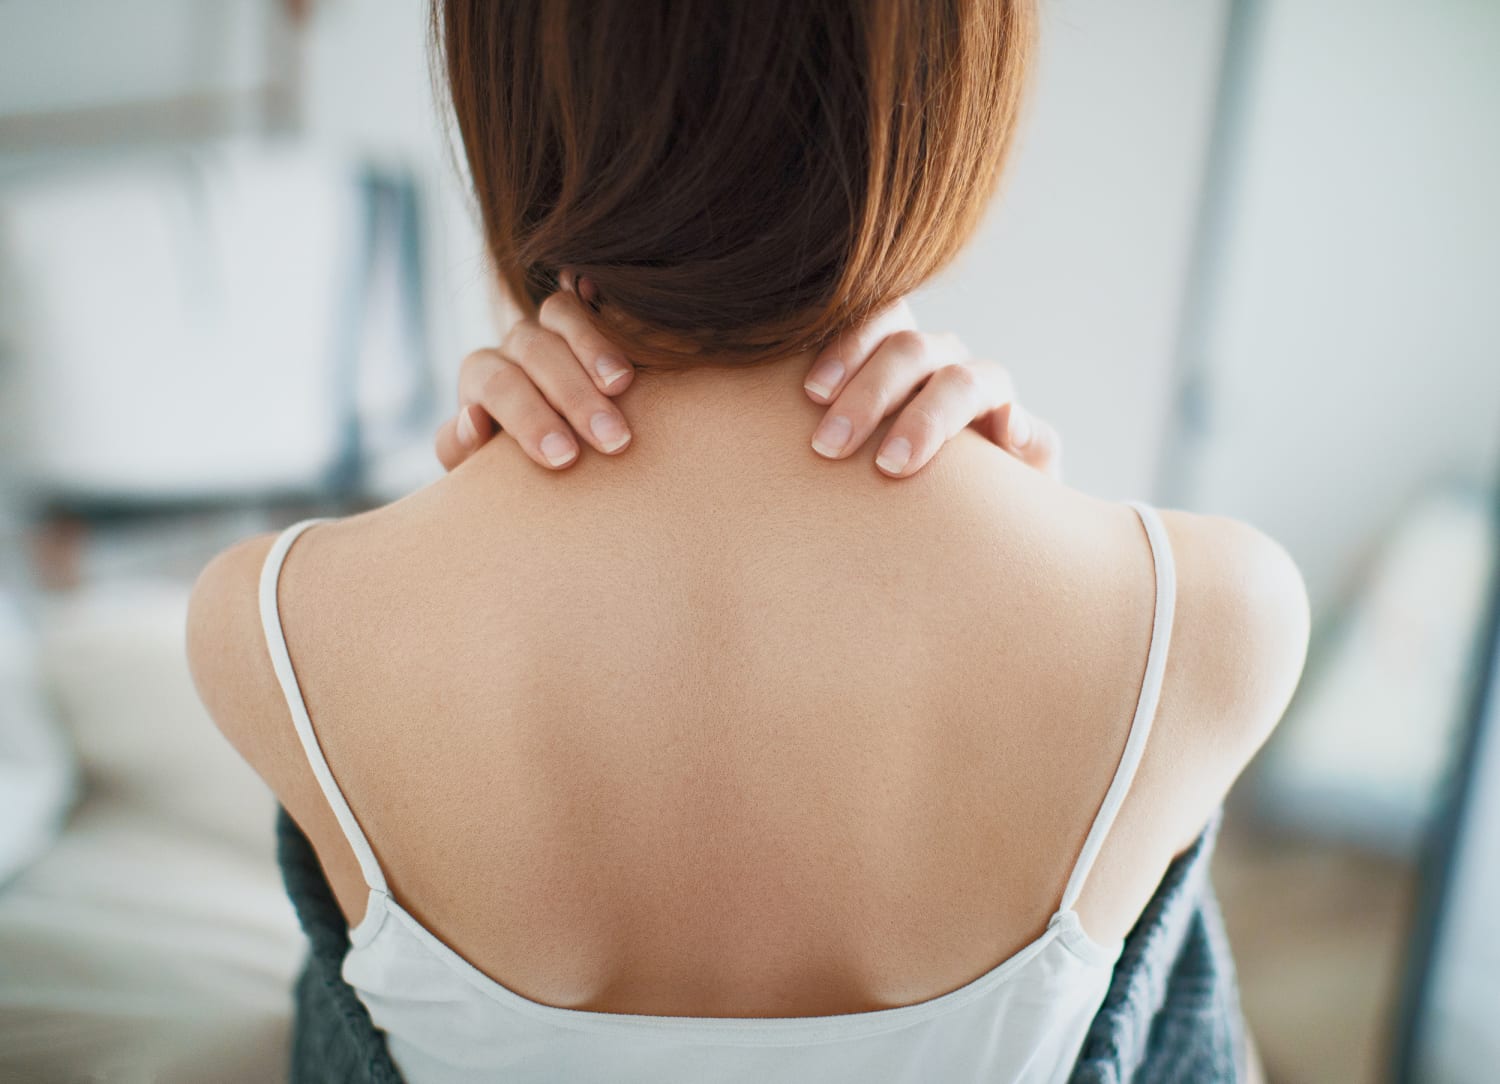 Lower back pain: Exercises to help back and neck pain